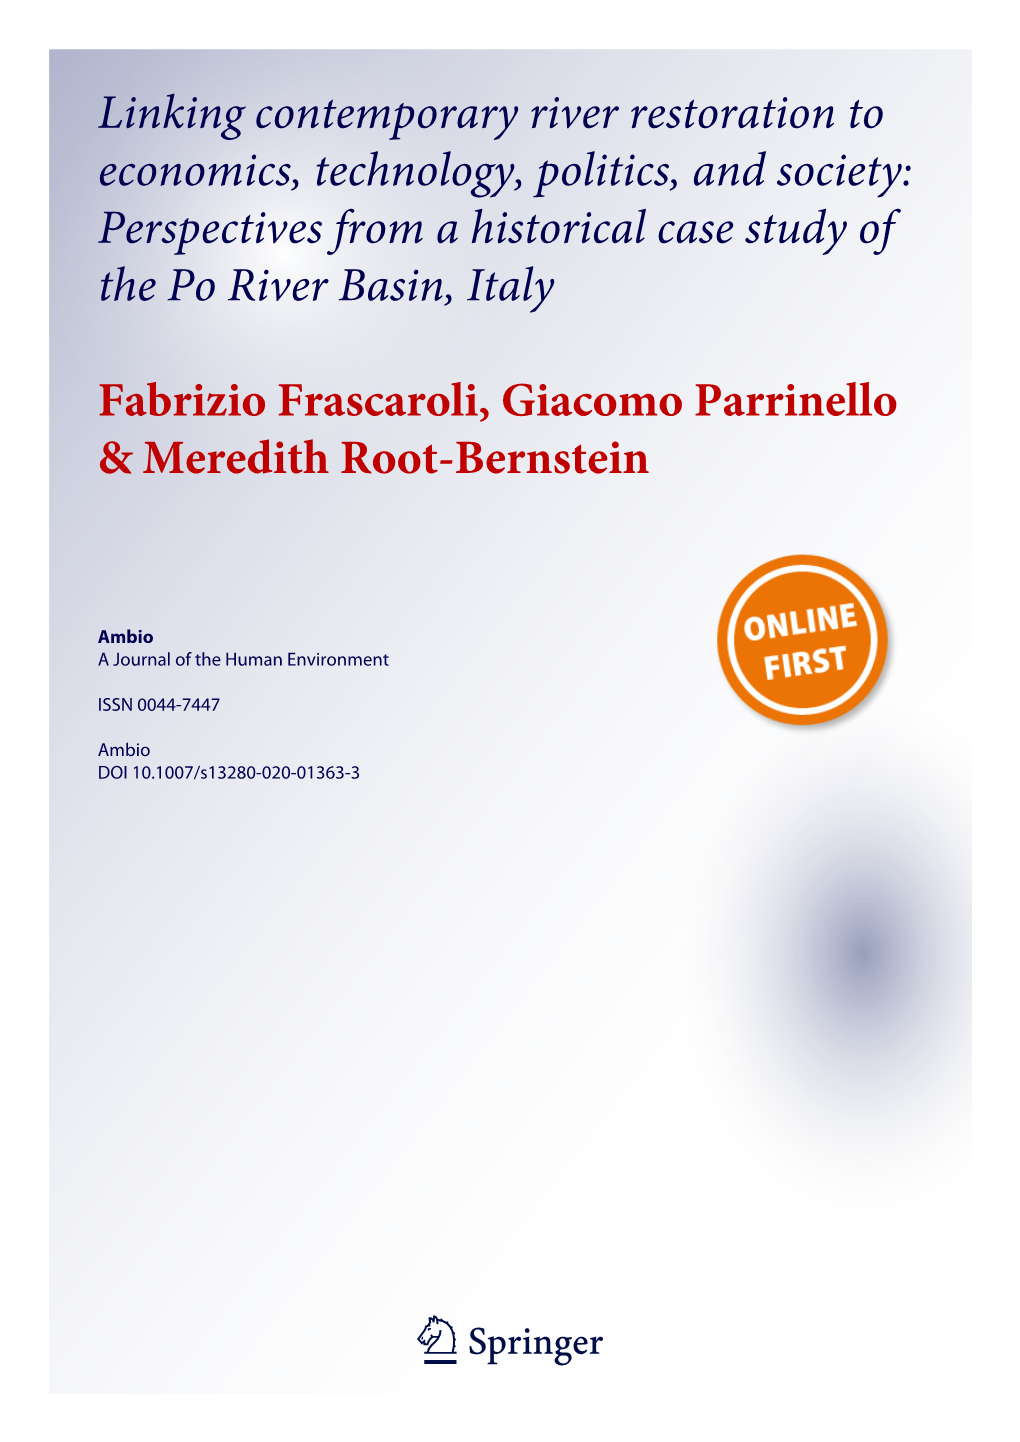 Linking Contemporary River Restoration to Economics, Technology, Politics, and Society: Perspectives from a Historical Case Study of the Po River Basin, Italy